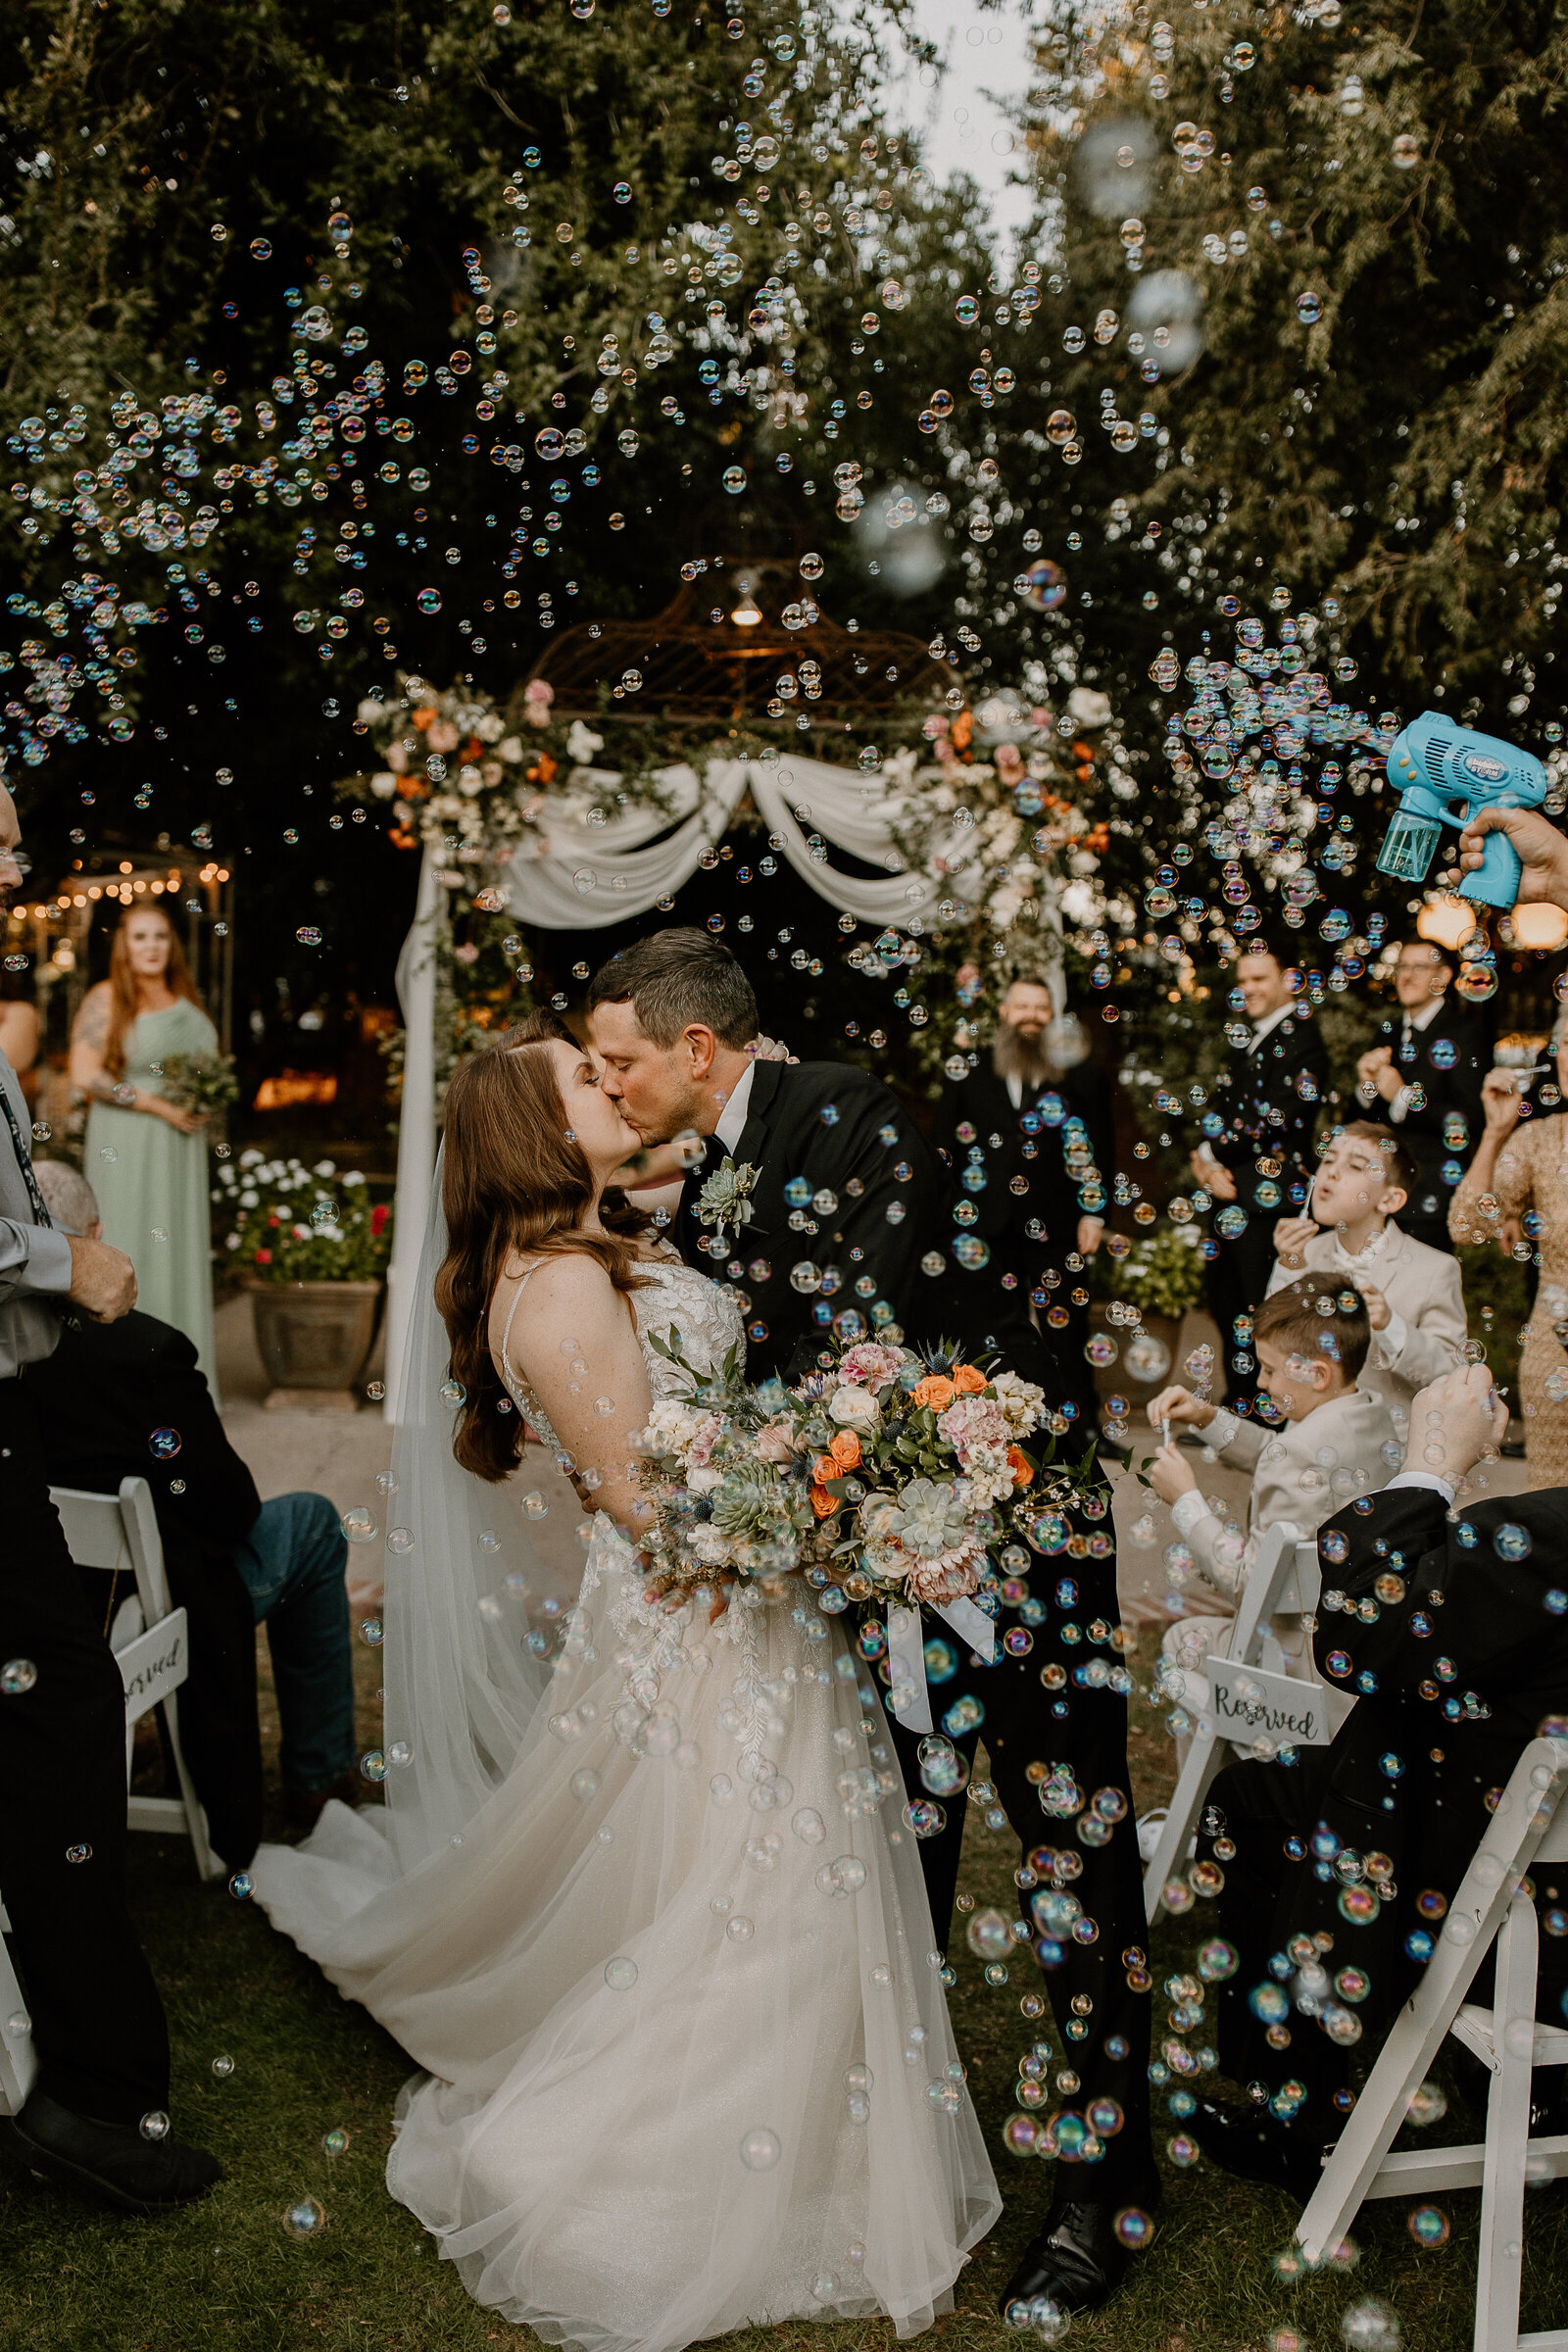 A wedding couple kissing while bubbles float all around them.